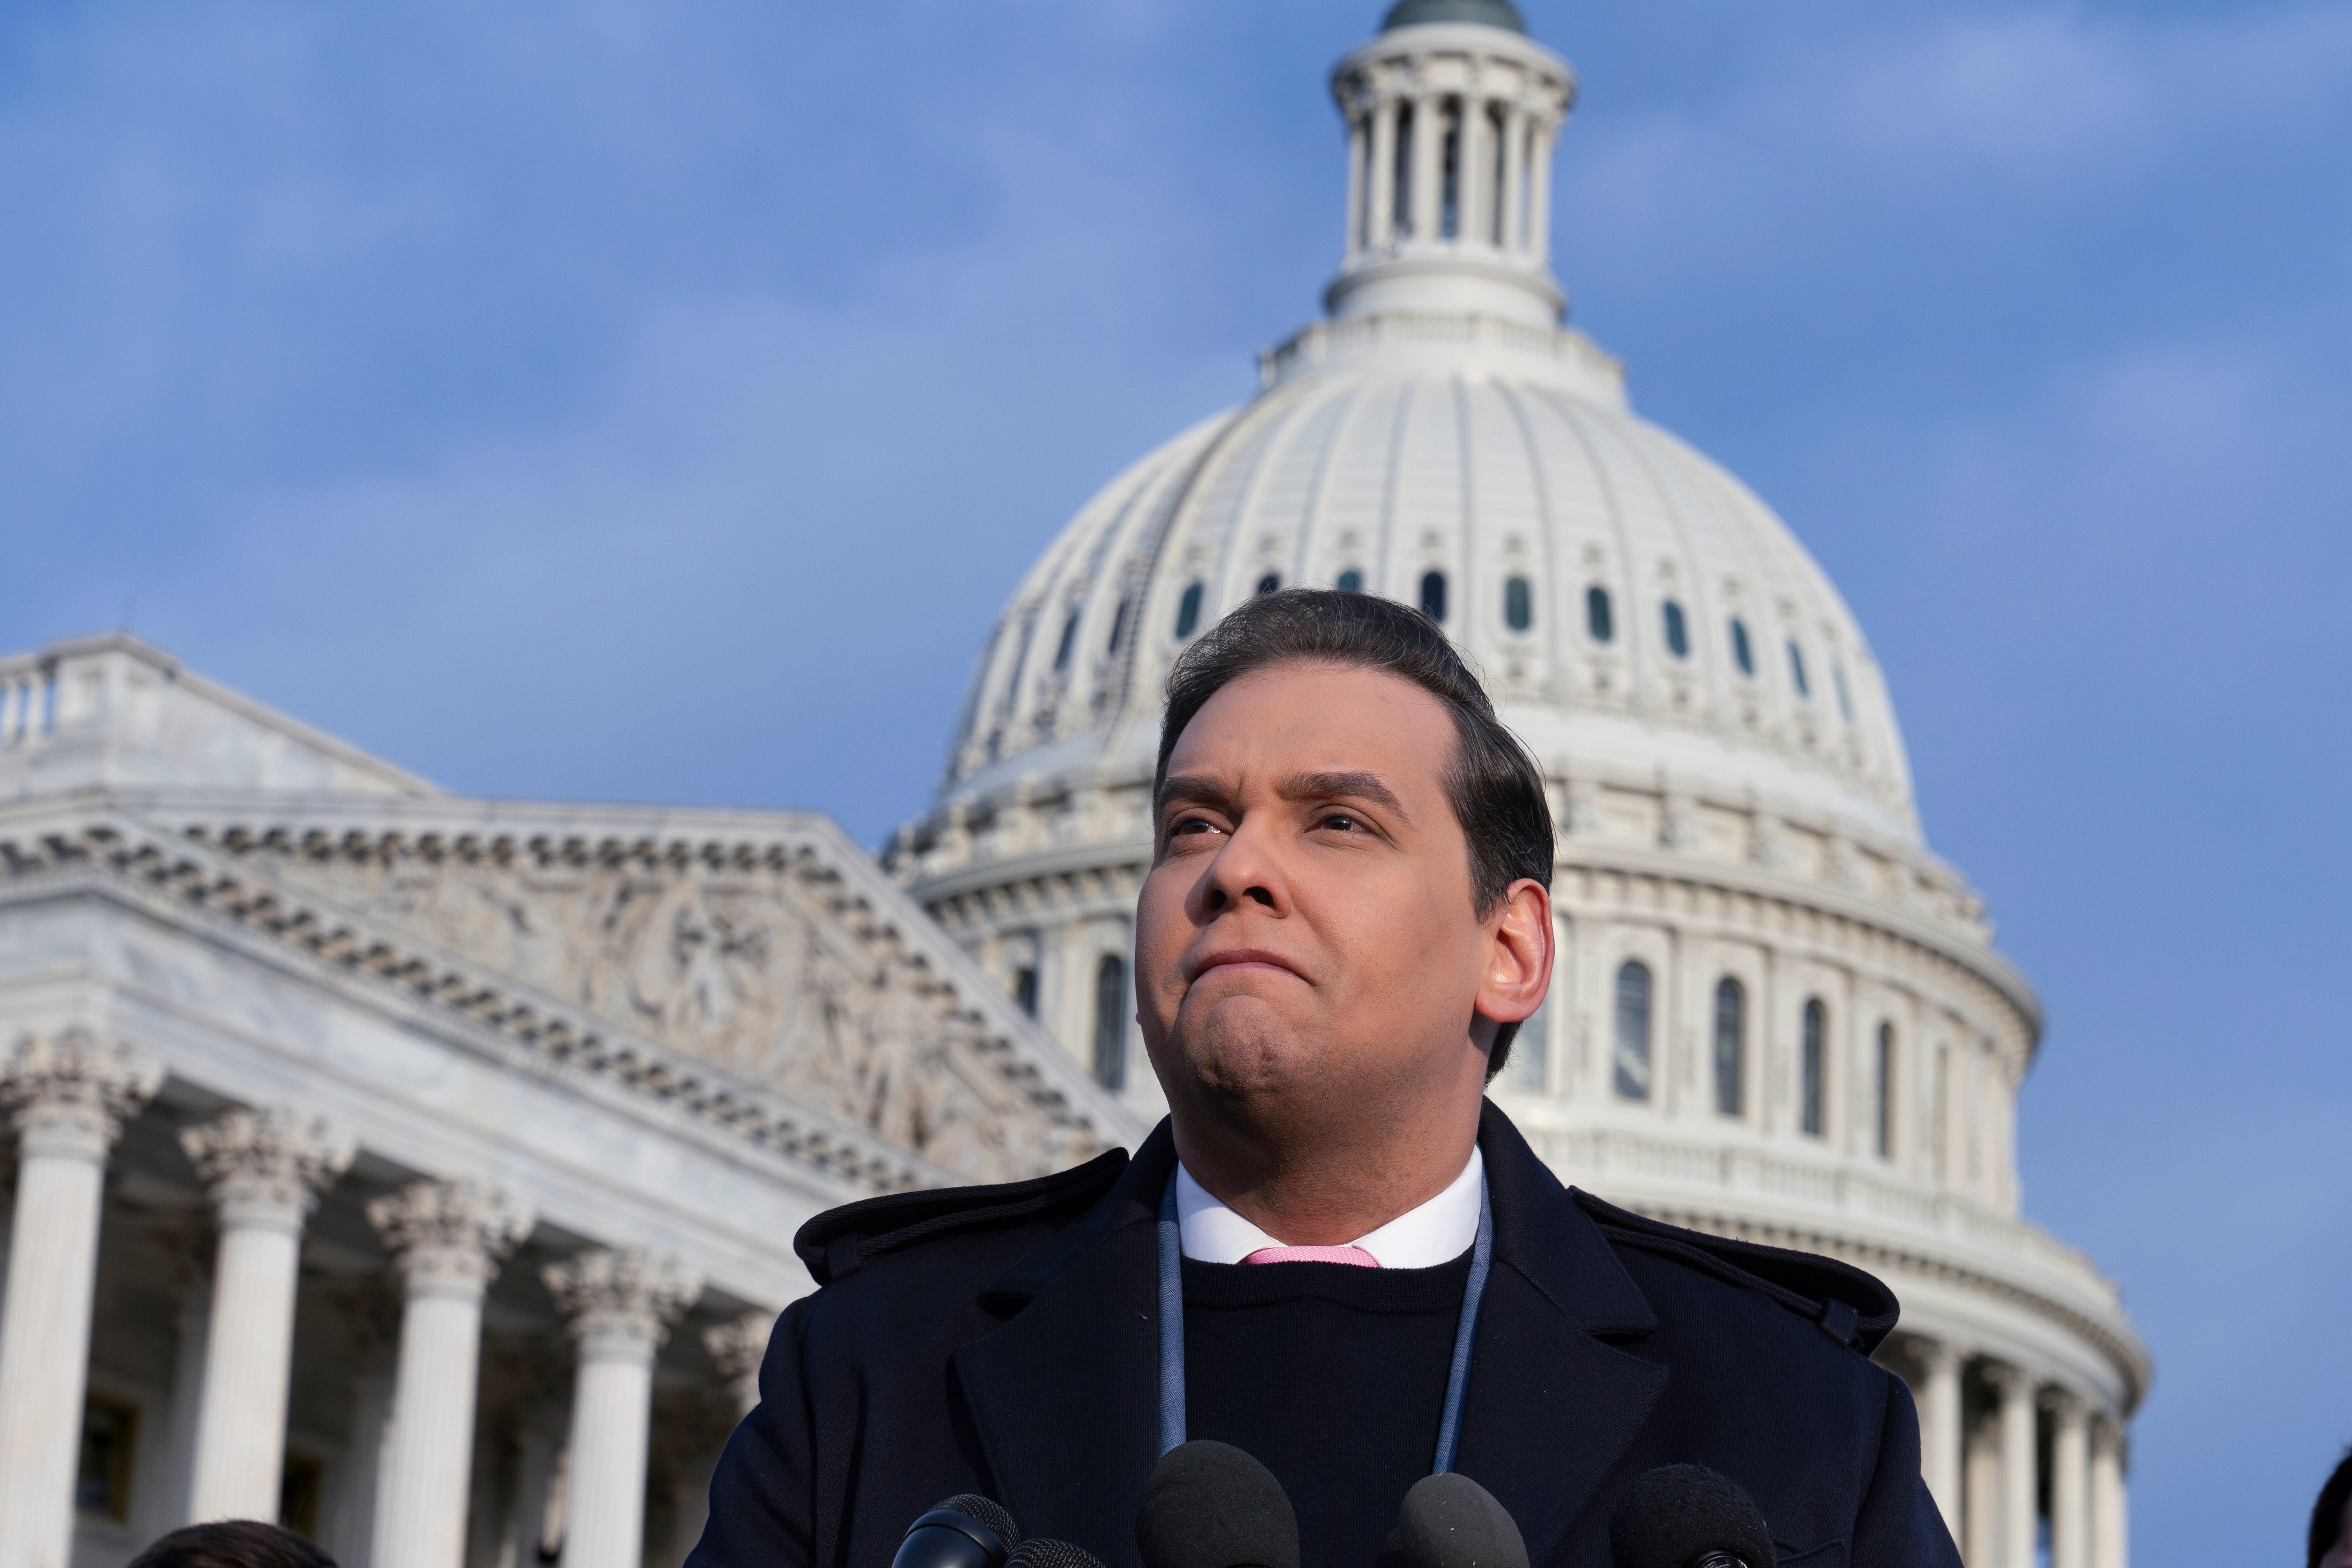 George Santos held a fiery press conference in front of the Capitol on Thursday